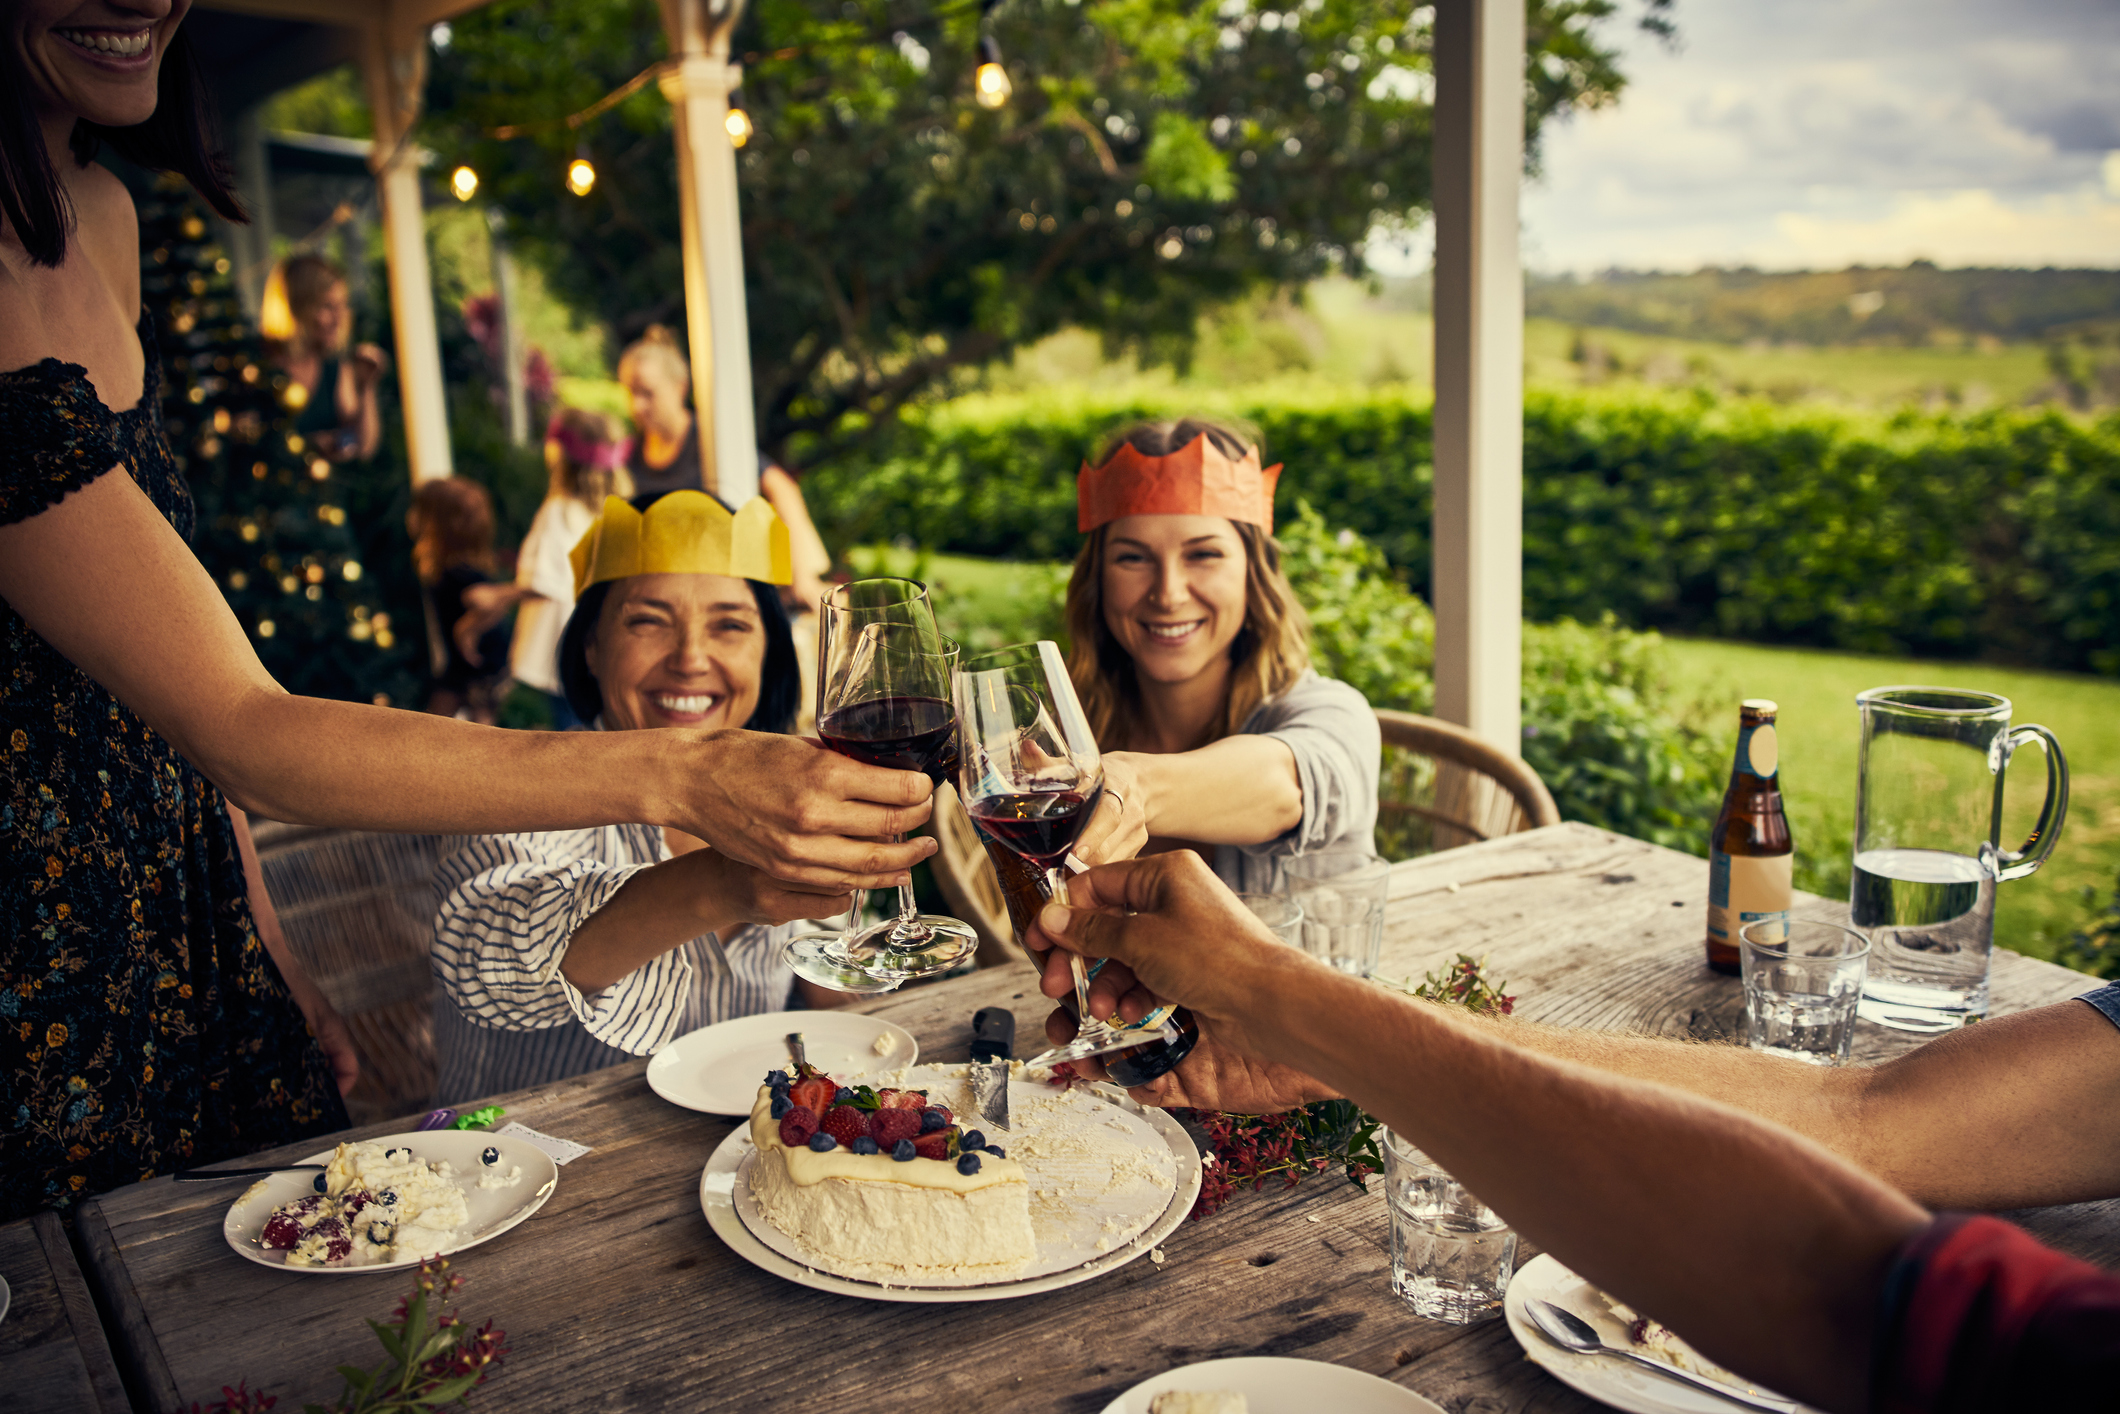 Planning a Christmas Get-Together? 8 Tips to Avoid a Super-Spreader Event